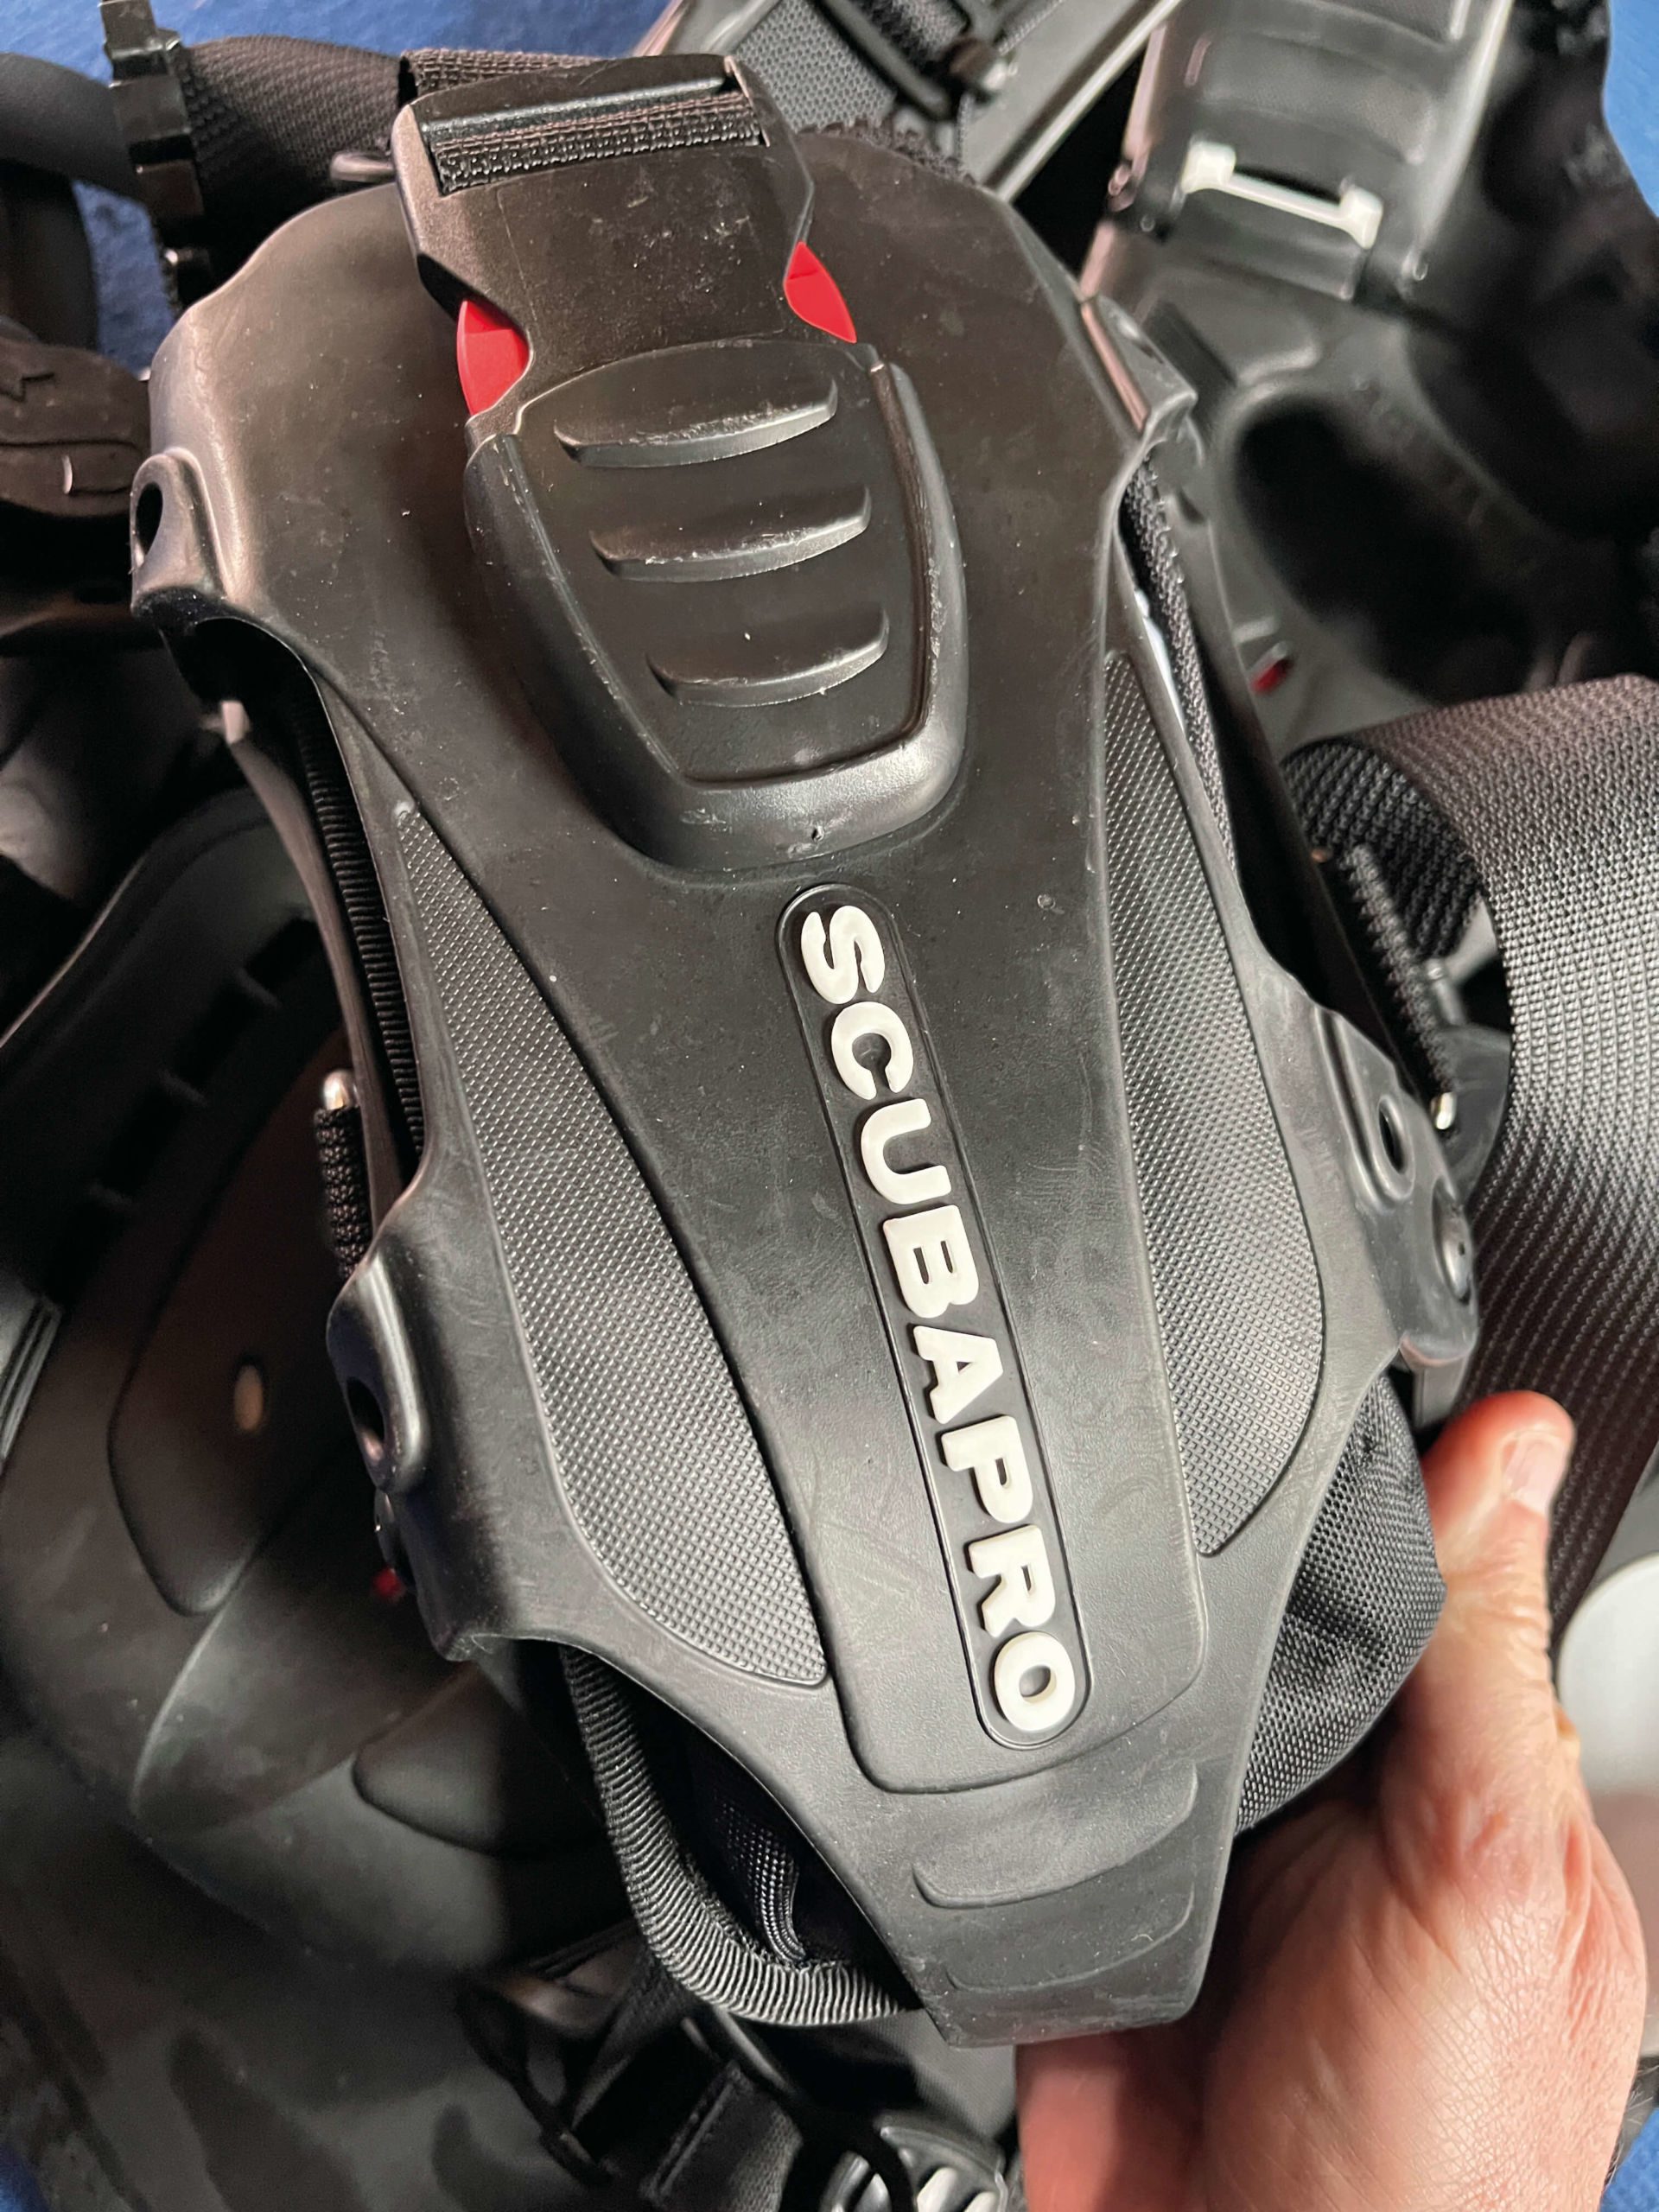 Scubapro Hydros Pro BCD Integrated Weight Pocket